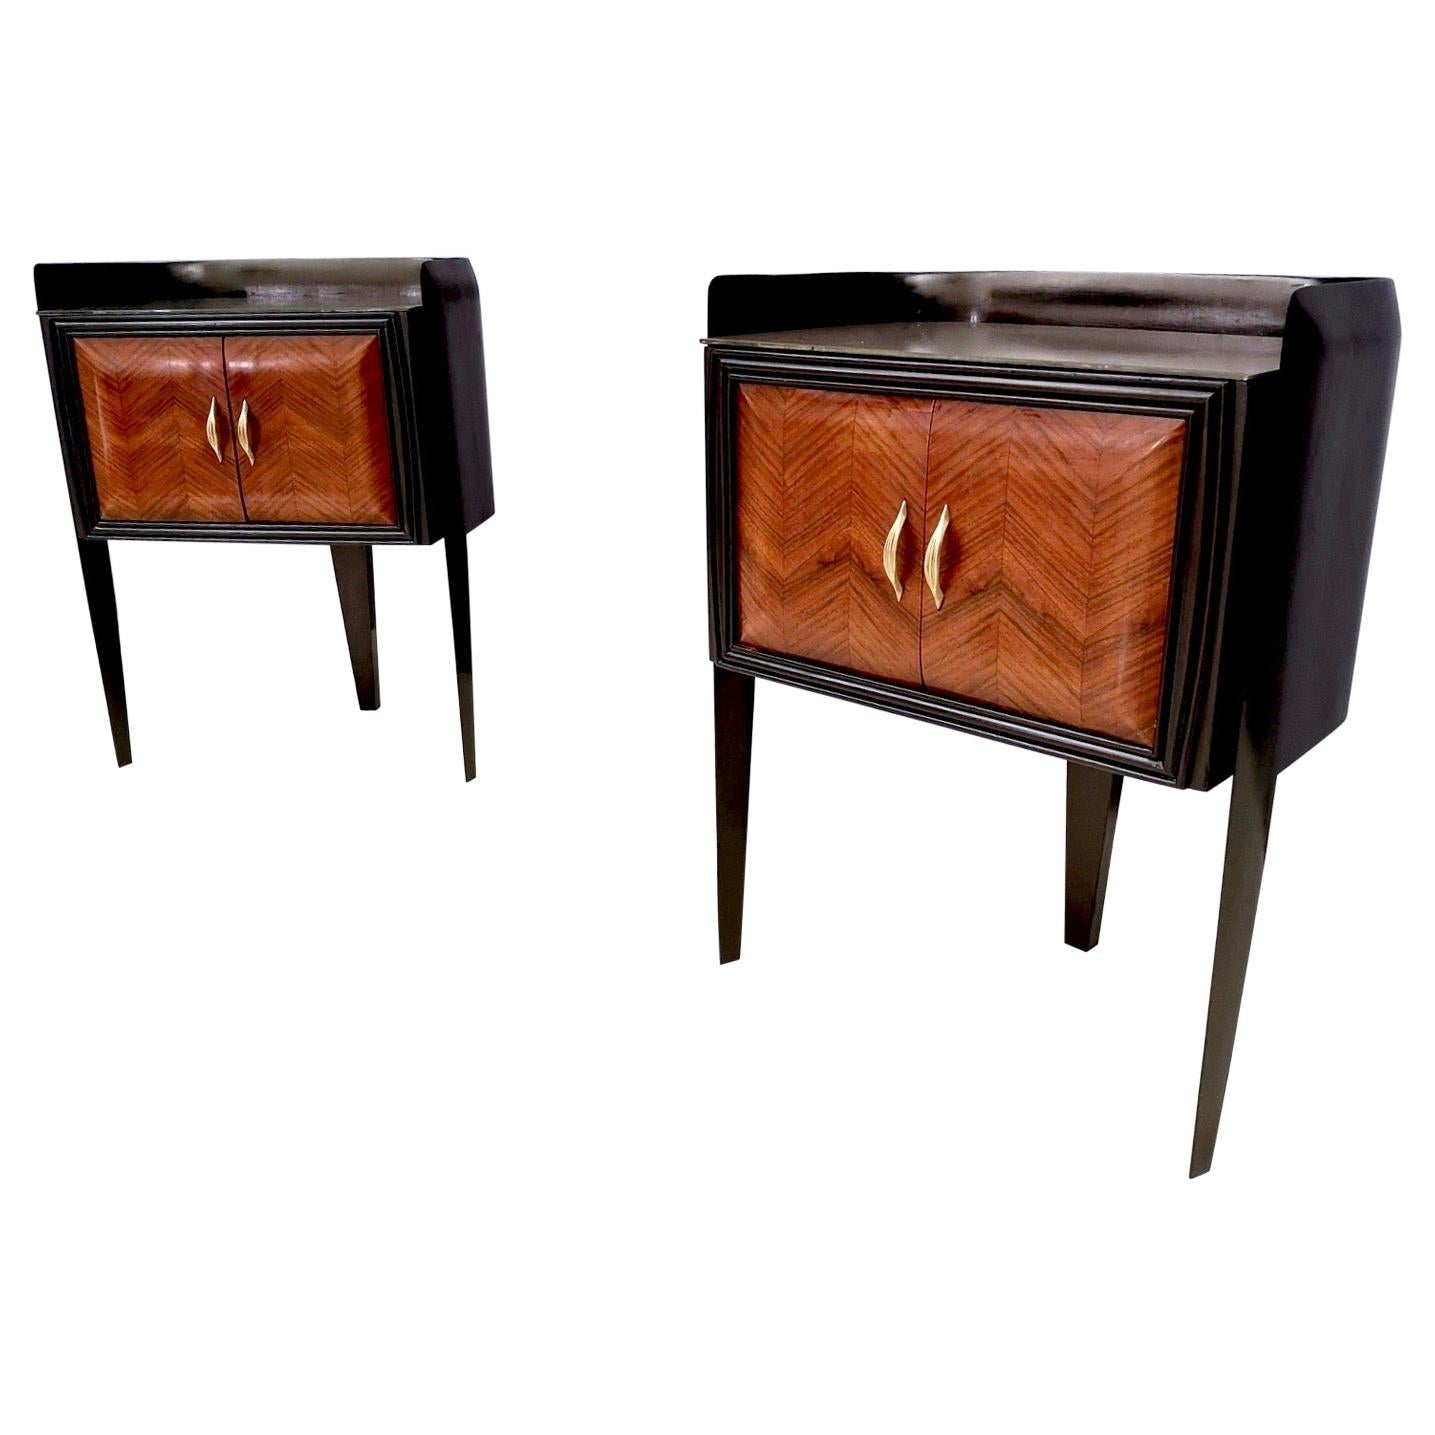 Pair of Walnut Nightstands with Engraved Glass Top by Paolo Buffa, Italy 1950s